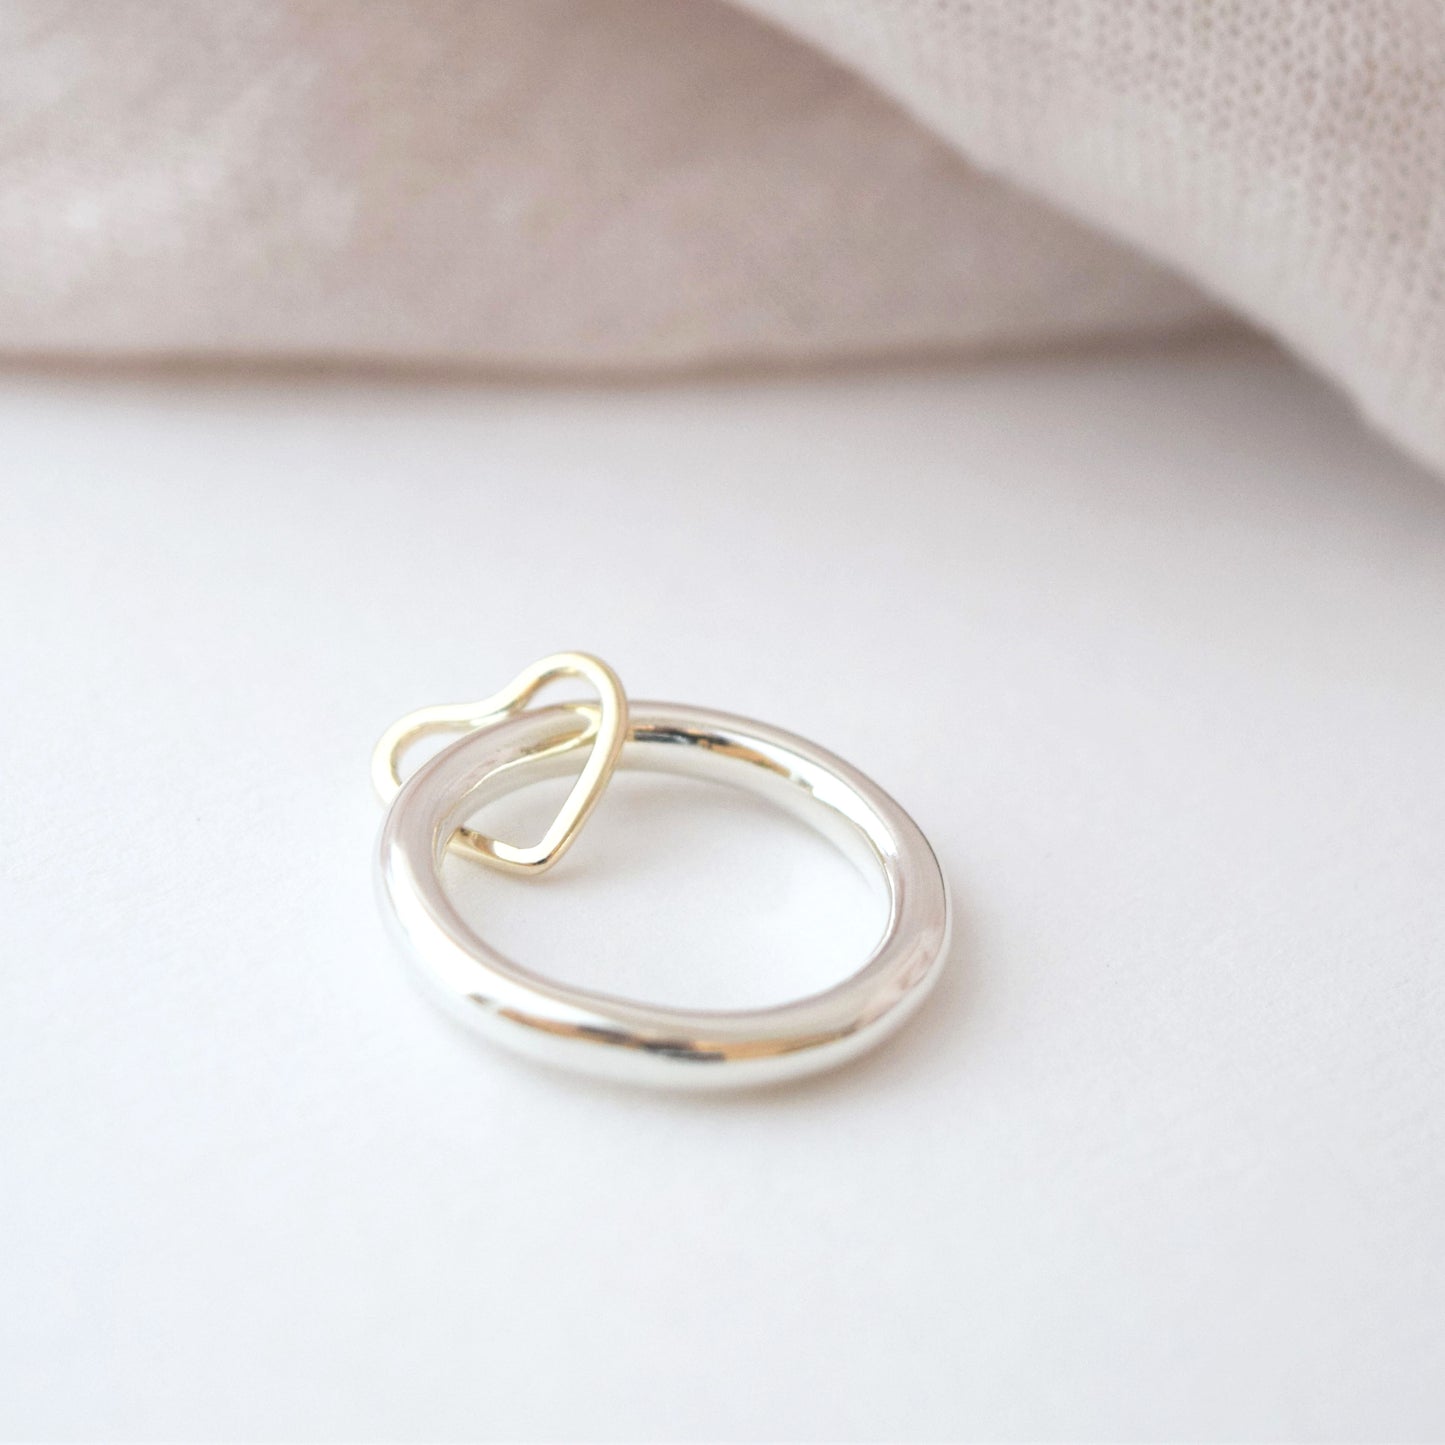 Heart spinner ring on white background with pale pink fabric